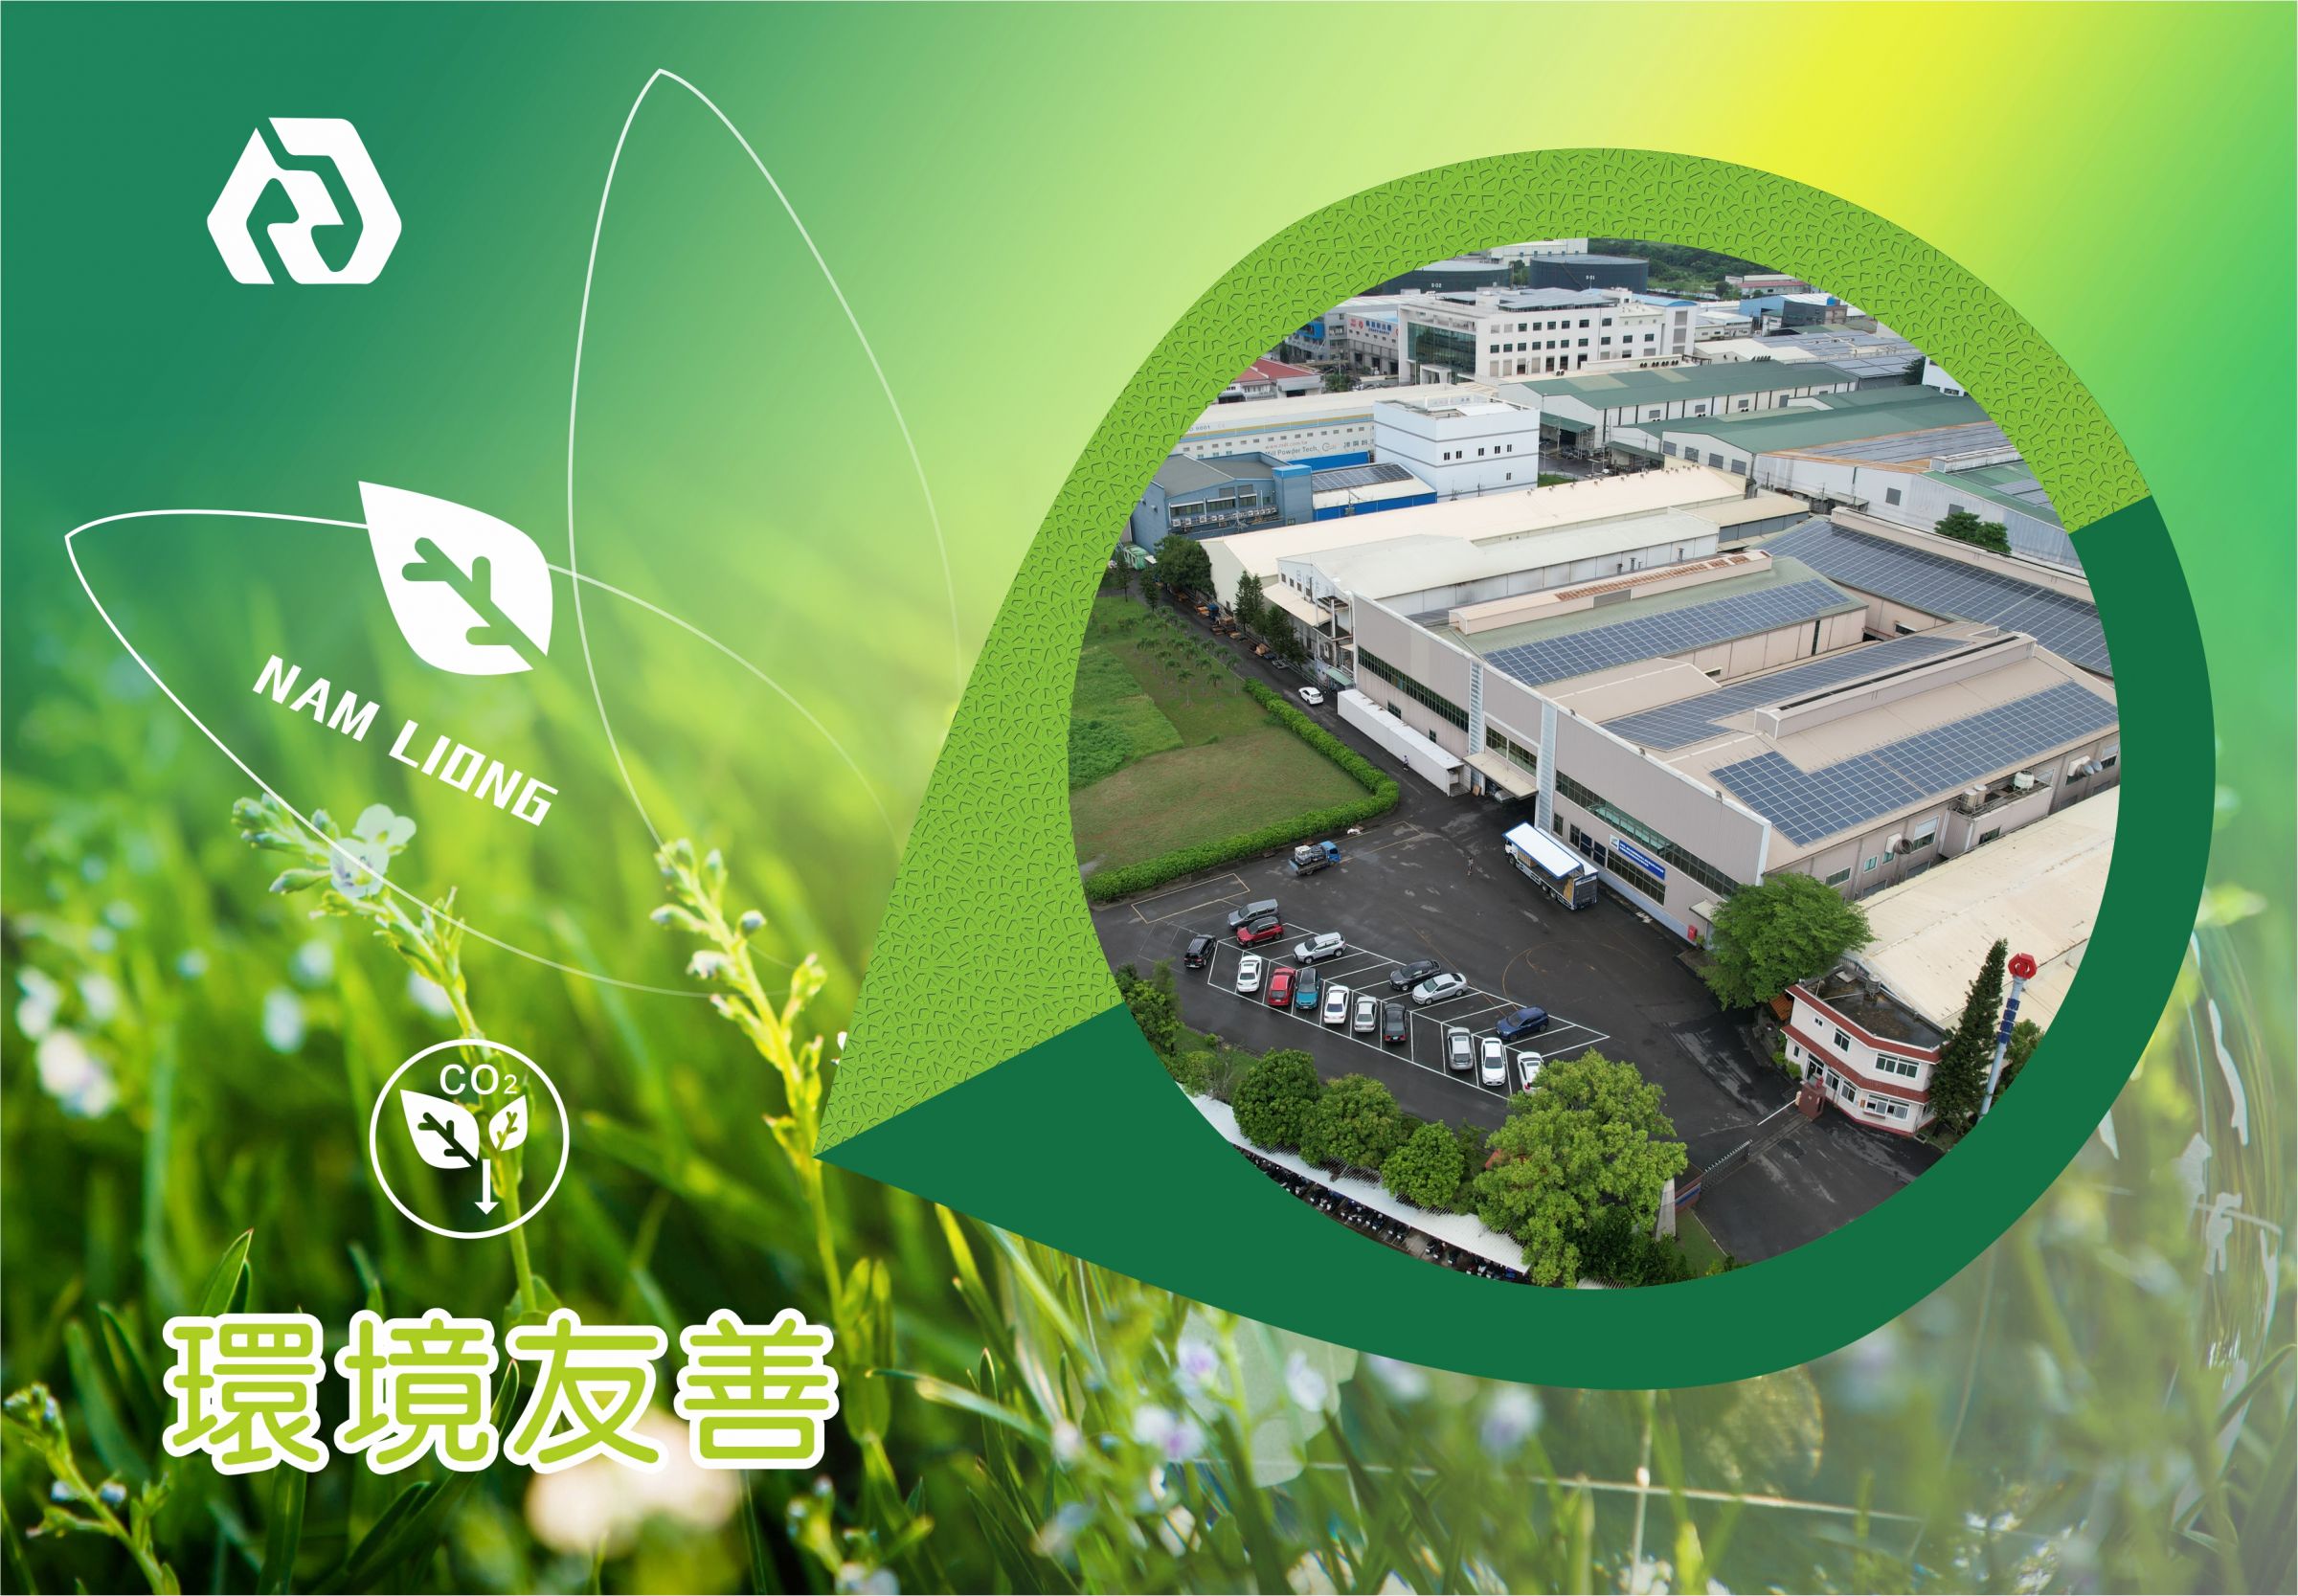 Nam Liong Global's Environmental Protection and Sustainability